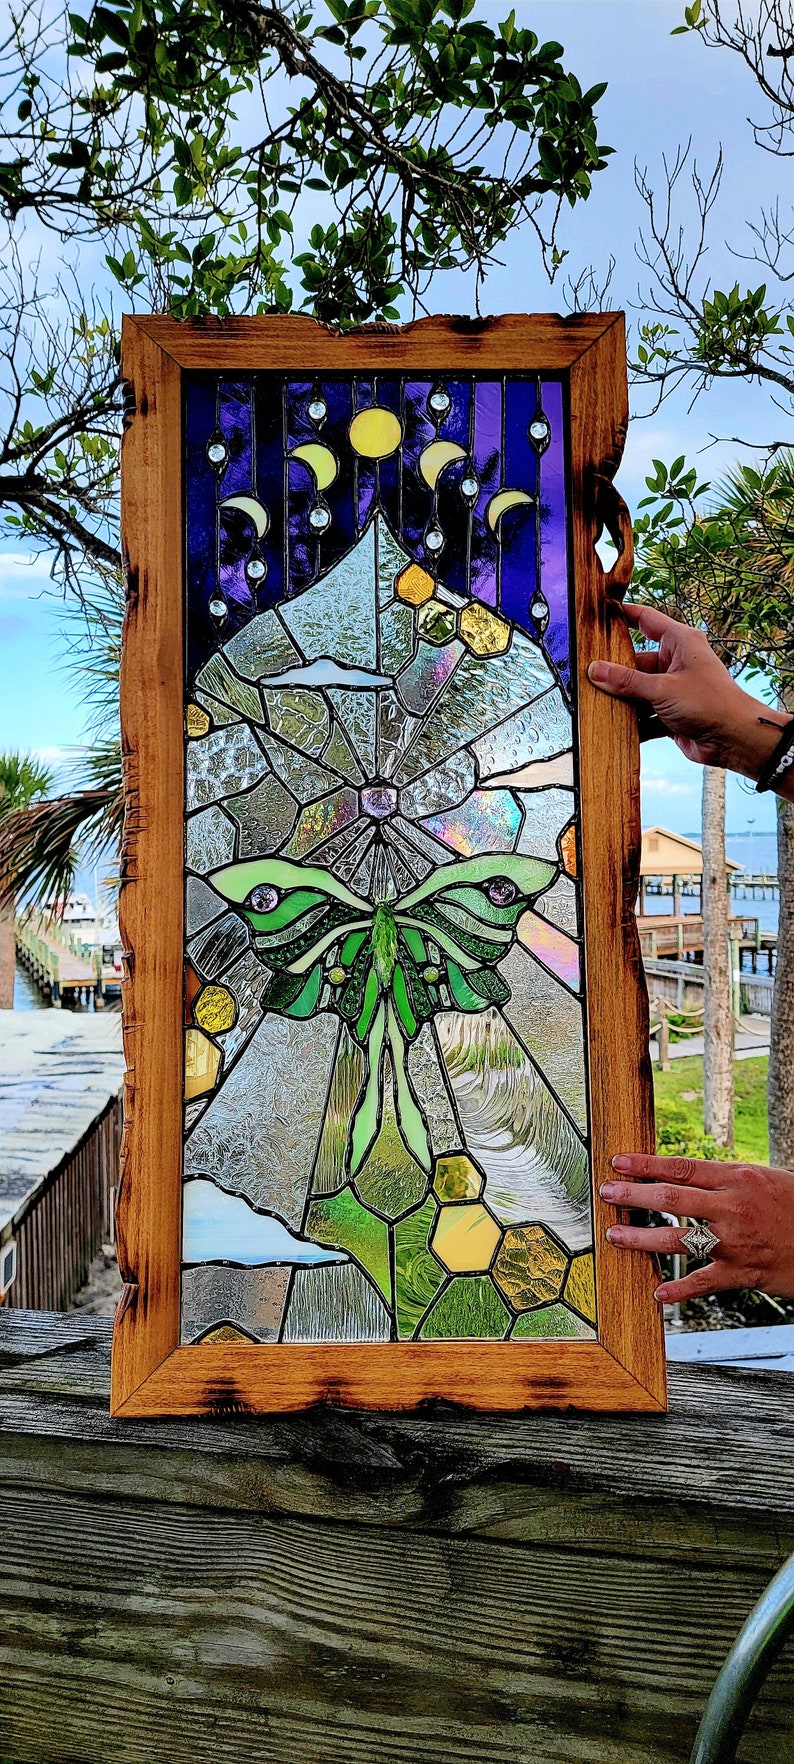 The Lunarian glass Tapestry window, luna moth, nature, plants, home decor, the sweet karma bar, stained glass window, sun catchers image 8